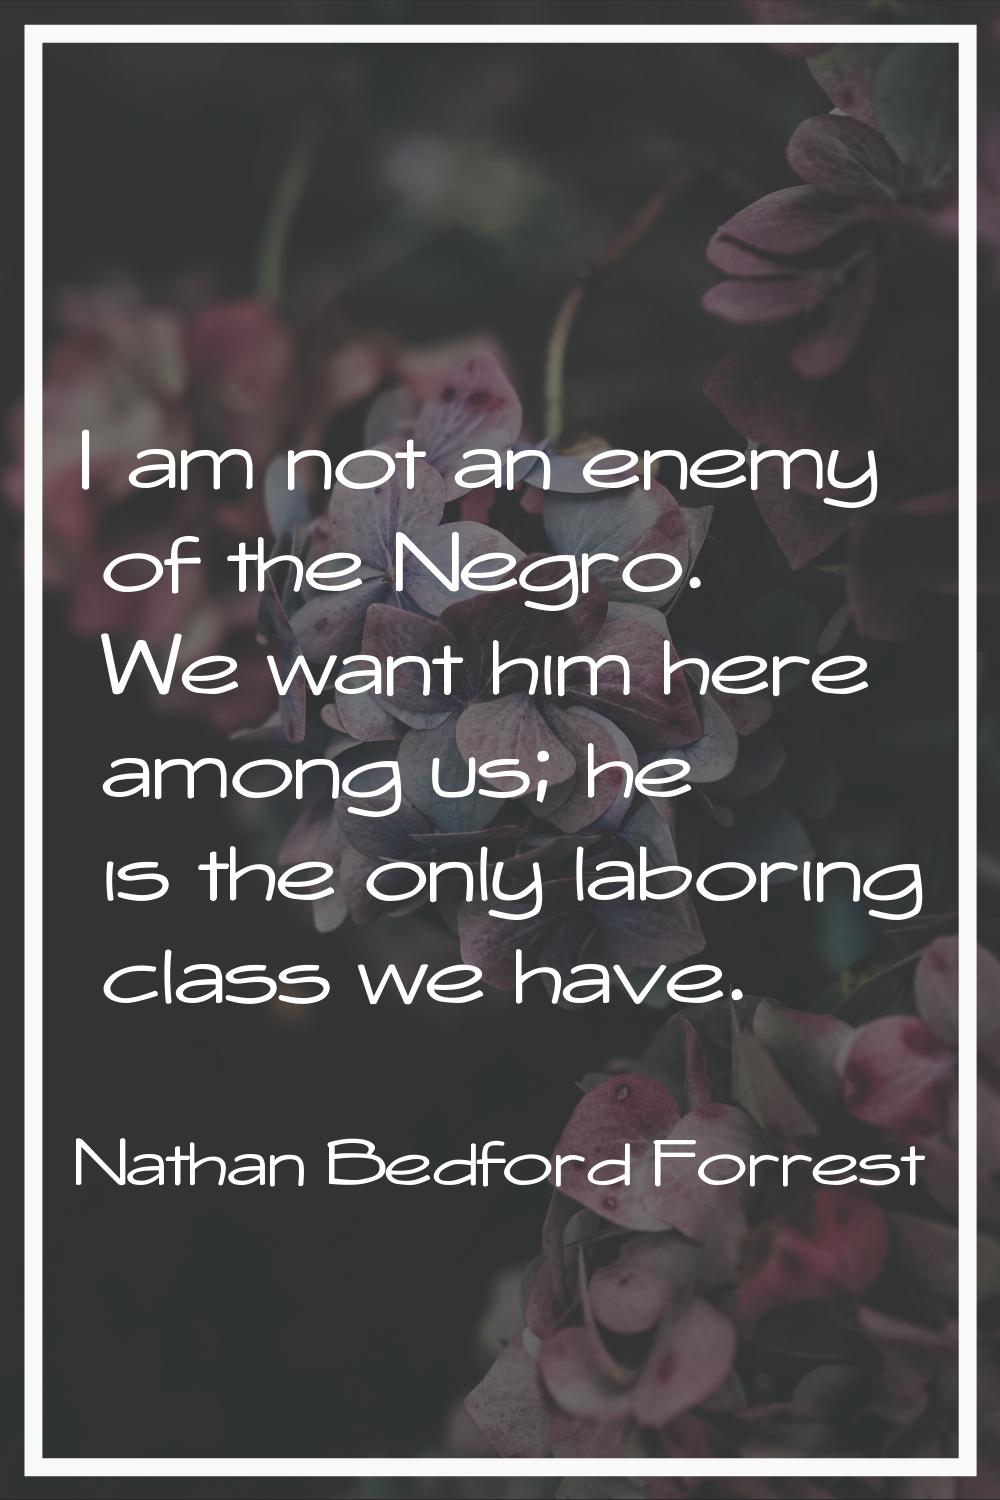 I am not an enemy of the Negro. We want him here among us; he is the only laboring class we have.